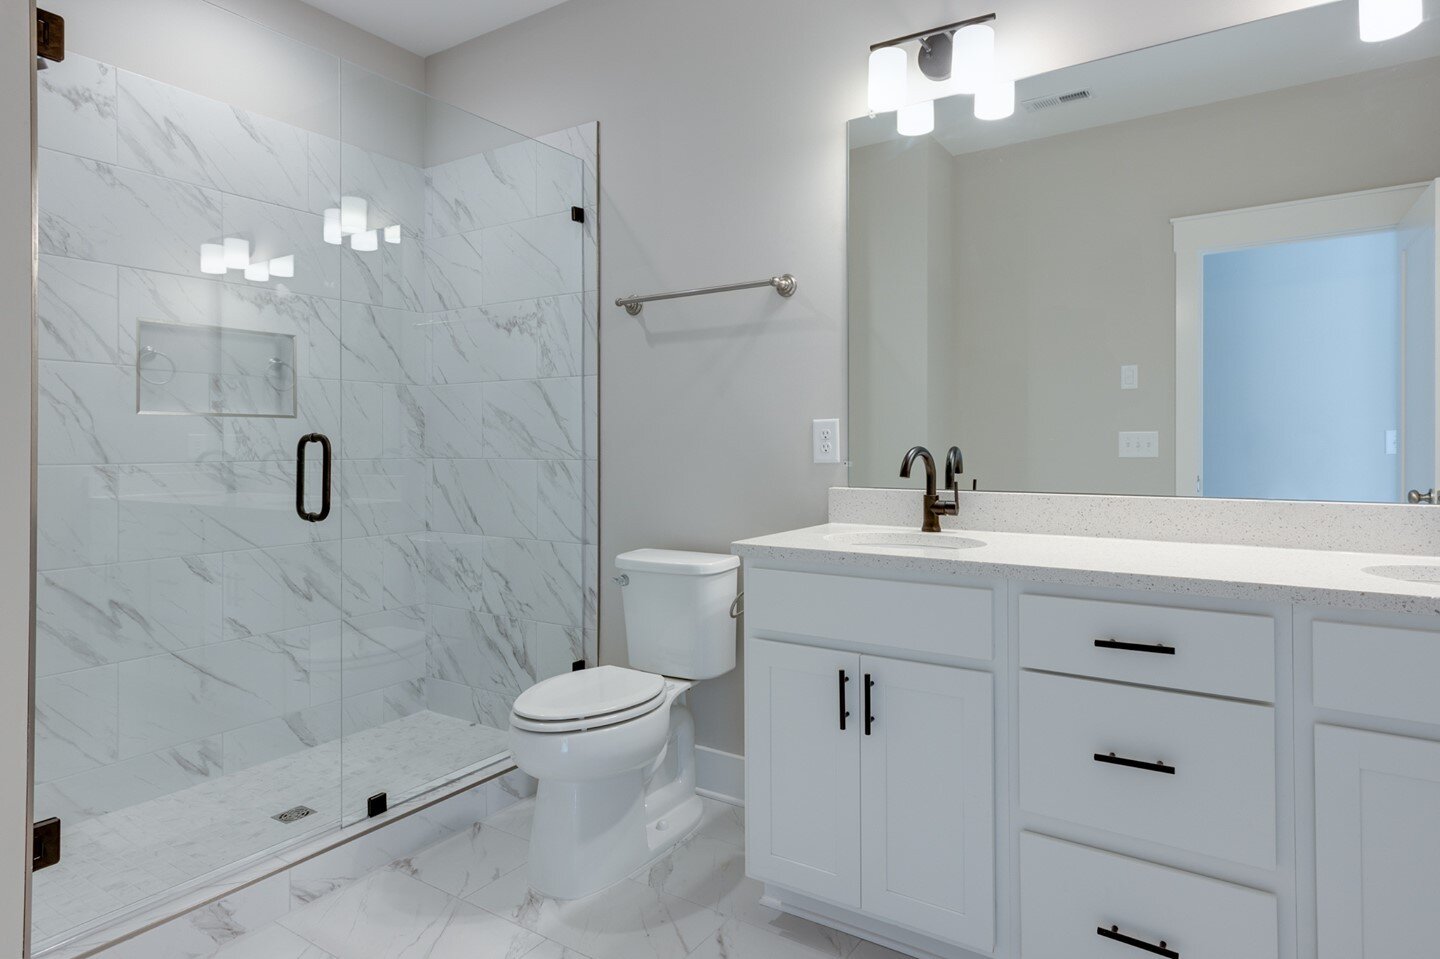 Marble tile and black hardware? Yes please! 

This master bathroom is the perfect combination of luxury and simplicity. 🤩

#bellemeade #bellevue #bellemeadetn #bellevuerealestate #bellevuetn #townhome #townhouse #nashville #nashvilletn #nashvillerea